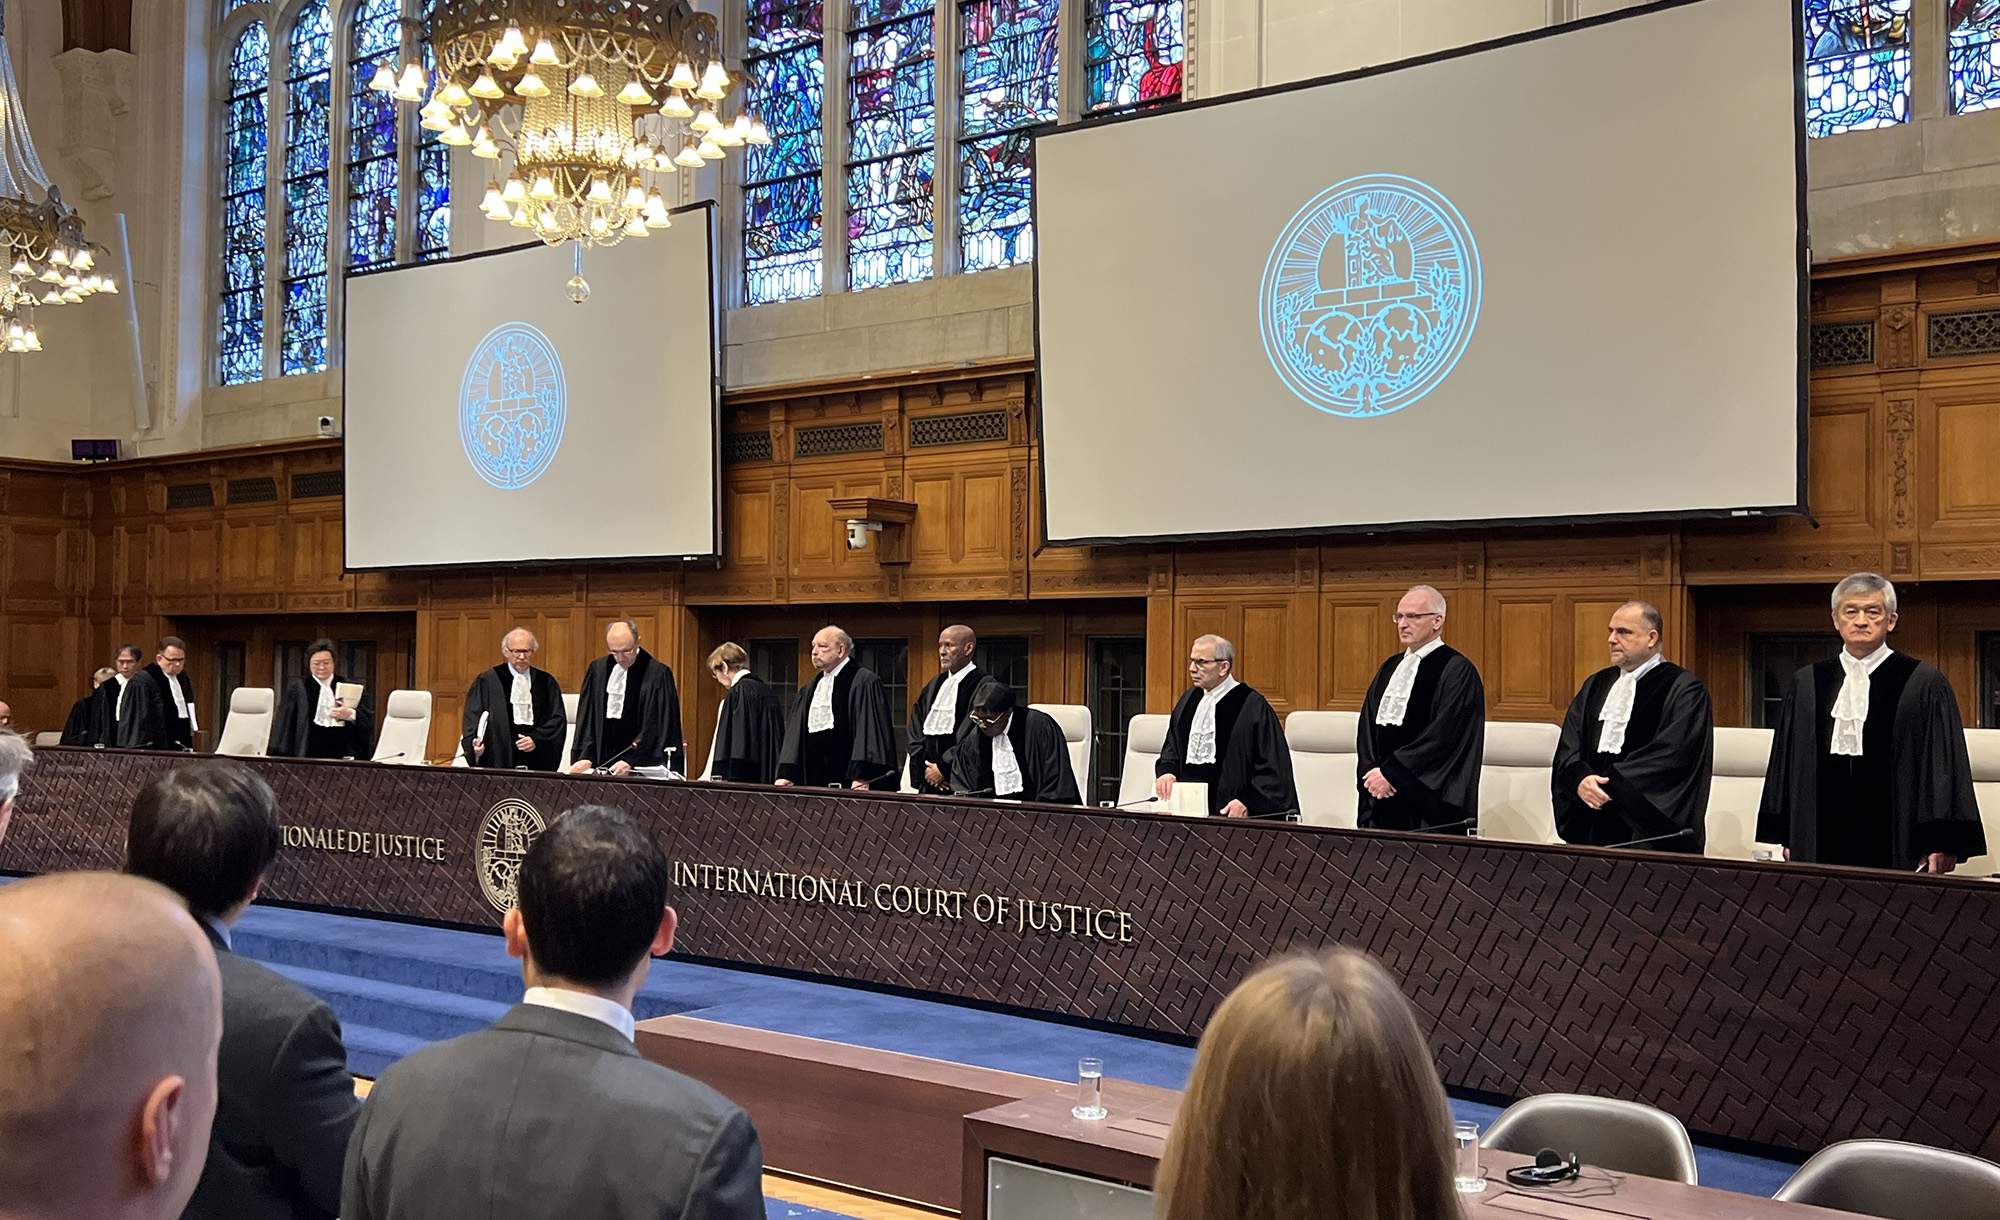 The Linguistically Challenged International Court of Justice